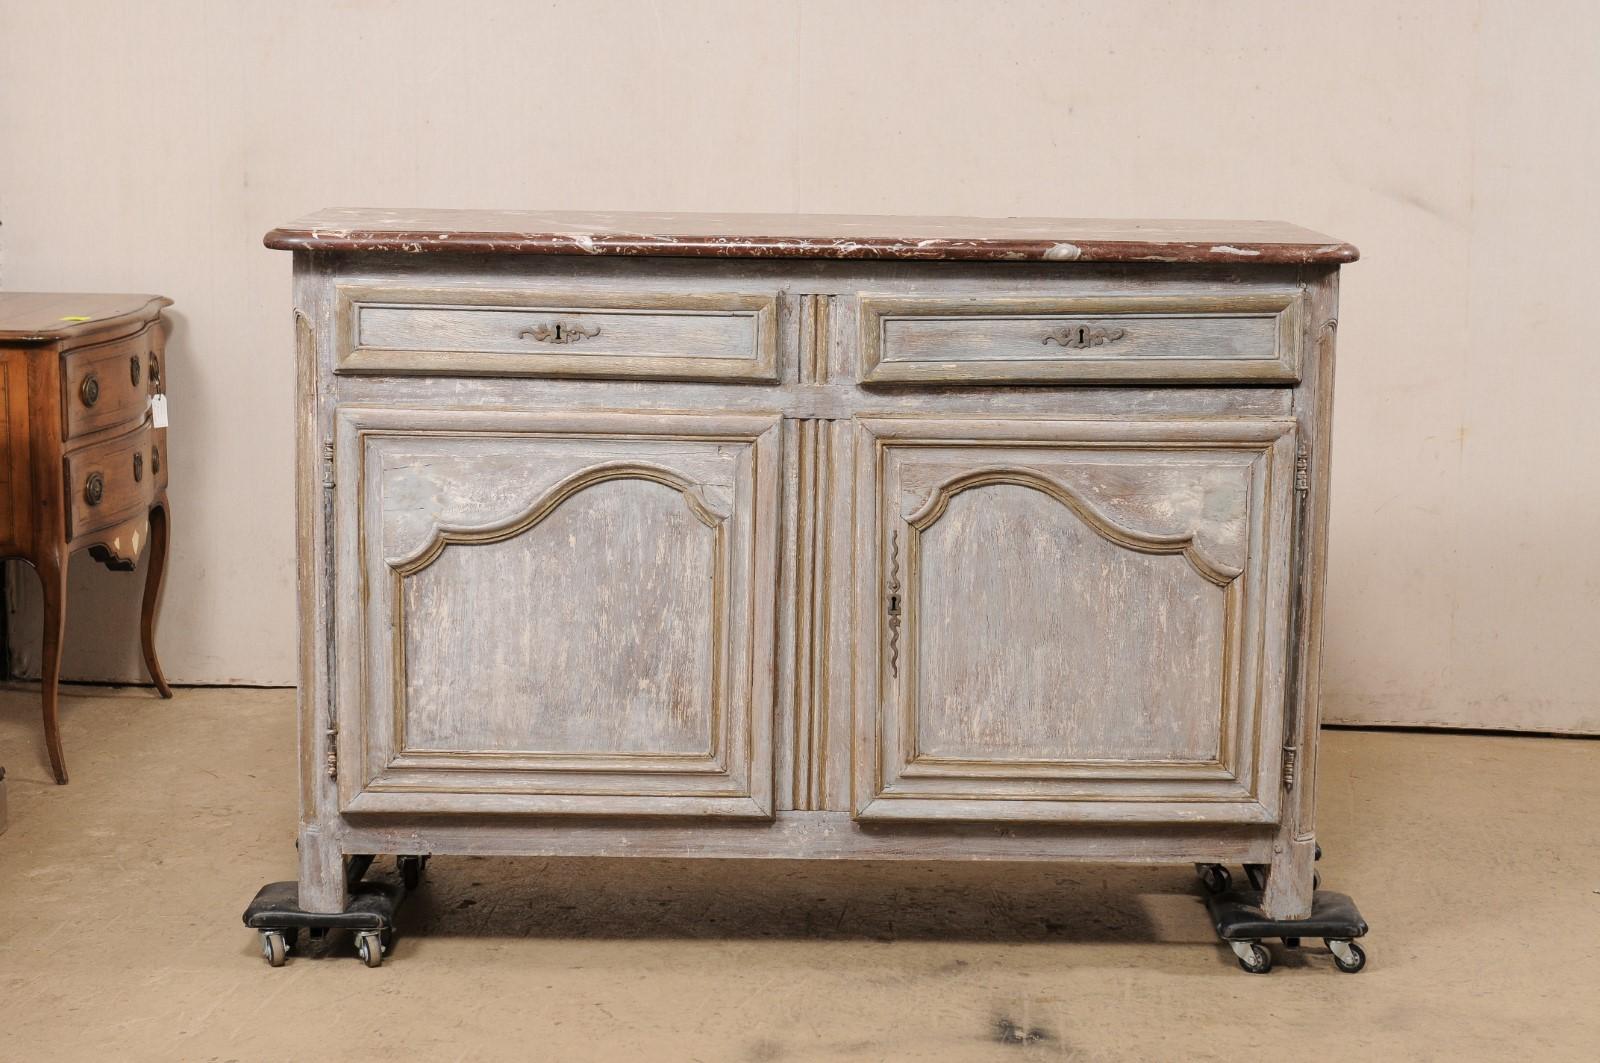 A French carved and painted wood buffet console, with original marble top, from the 19th century. This antique cabinet from France features the original marble top, rectangular in shaped with rounded front corners, atop the wooden case which houses